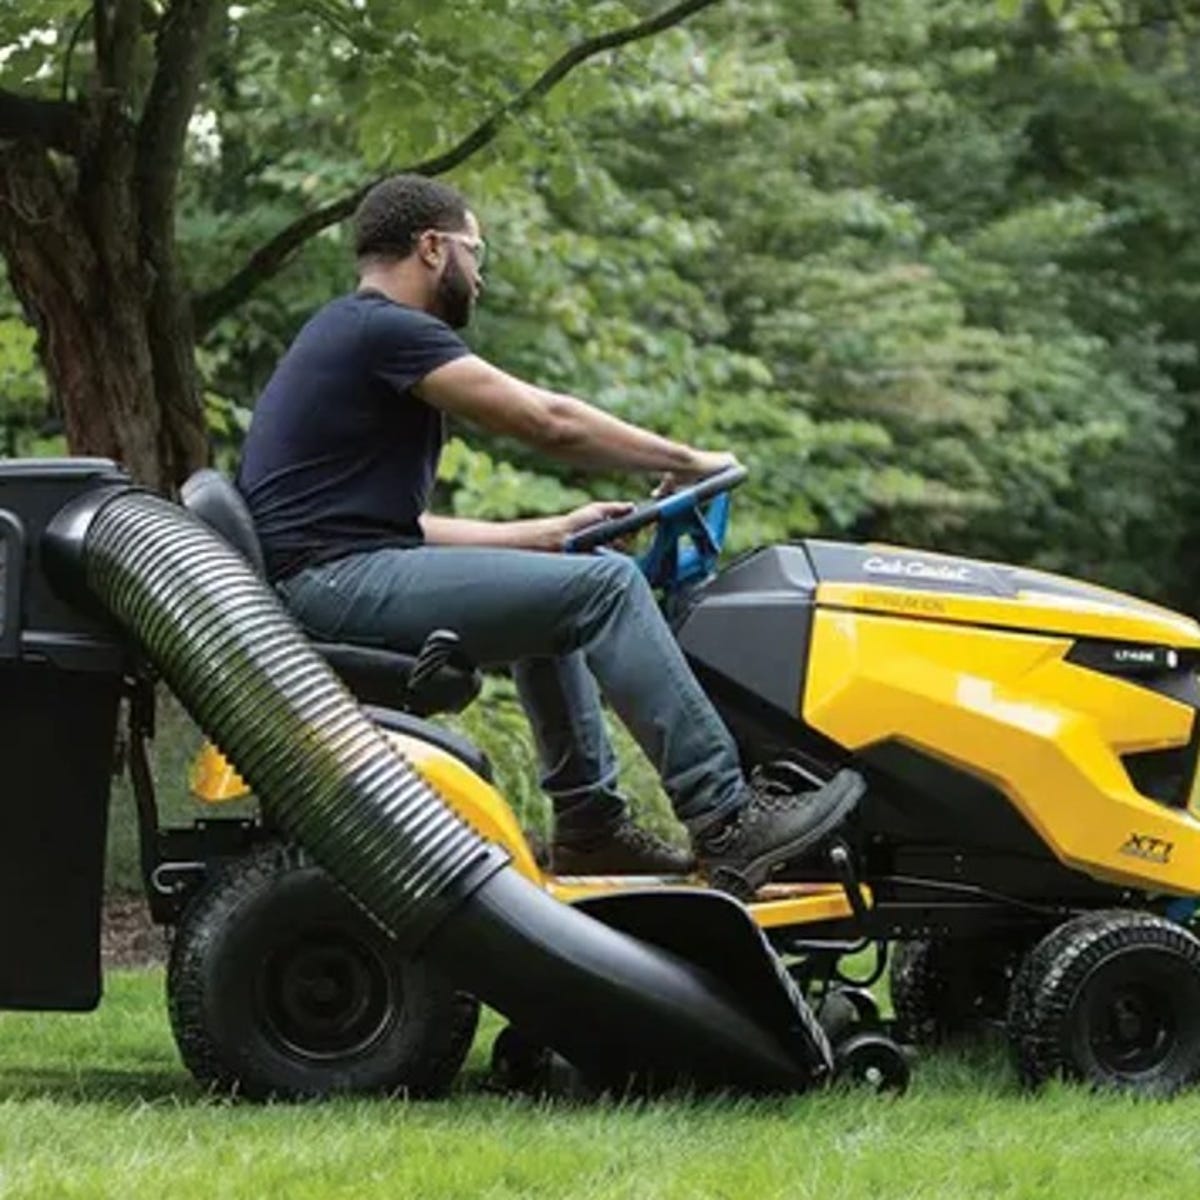 GSA Equipment Is A Leading Exmark Mower Supplier In Ohio.